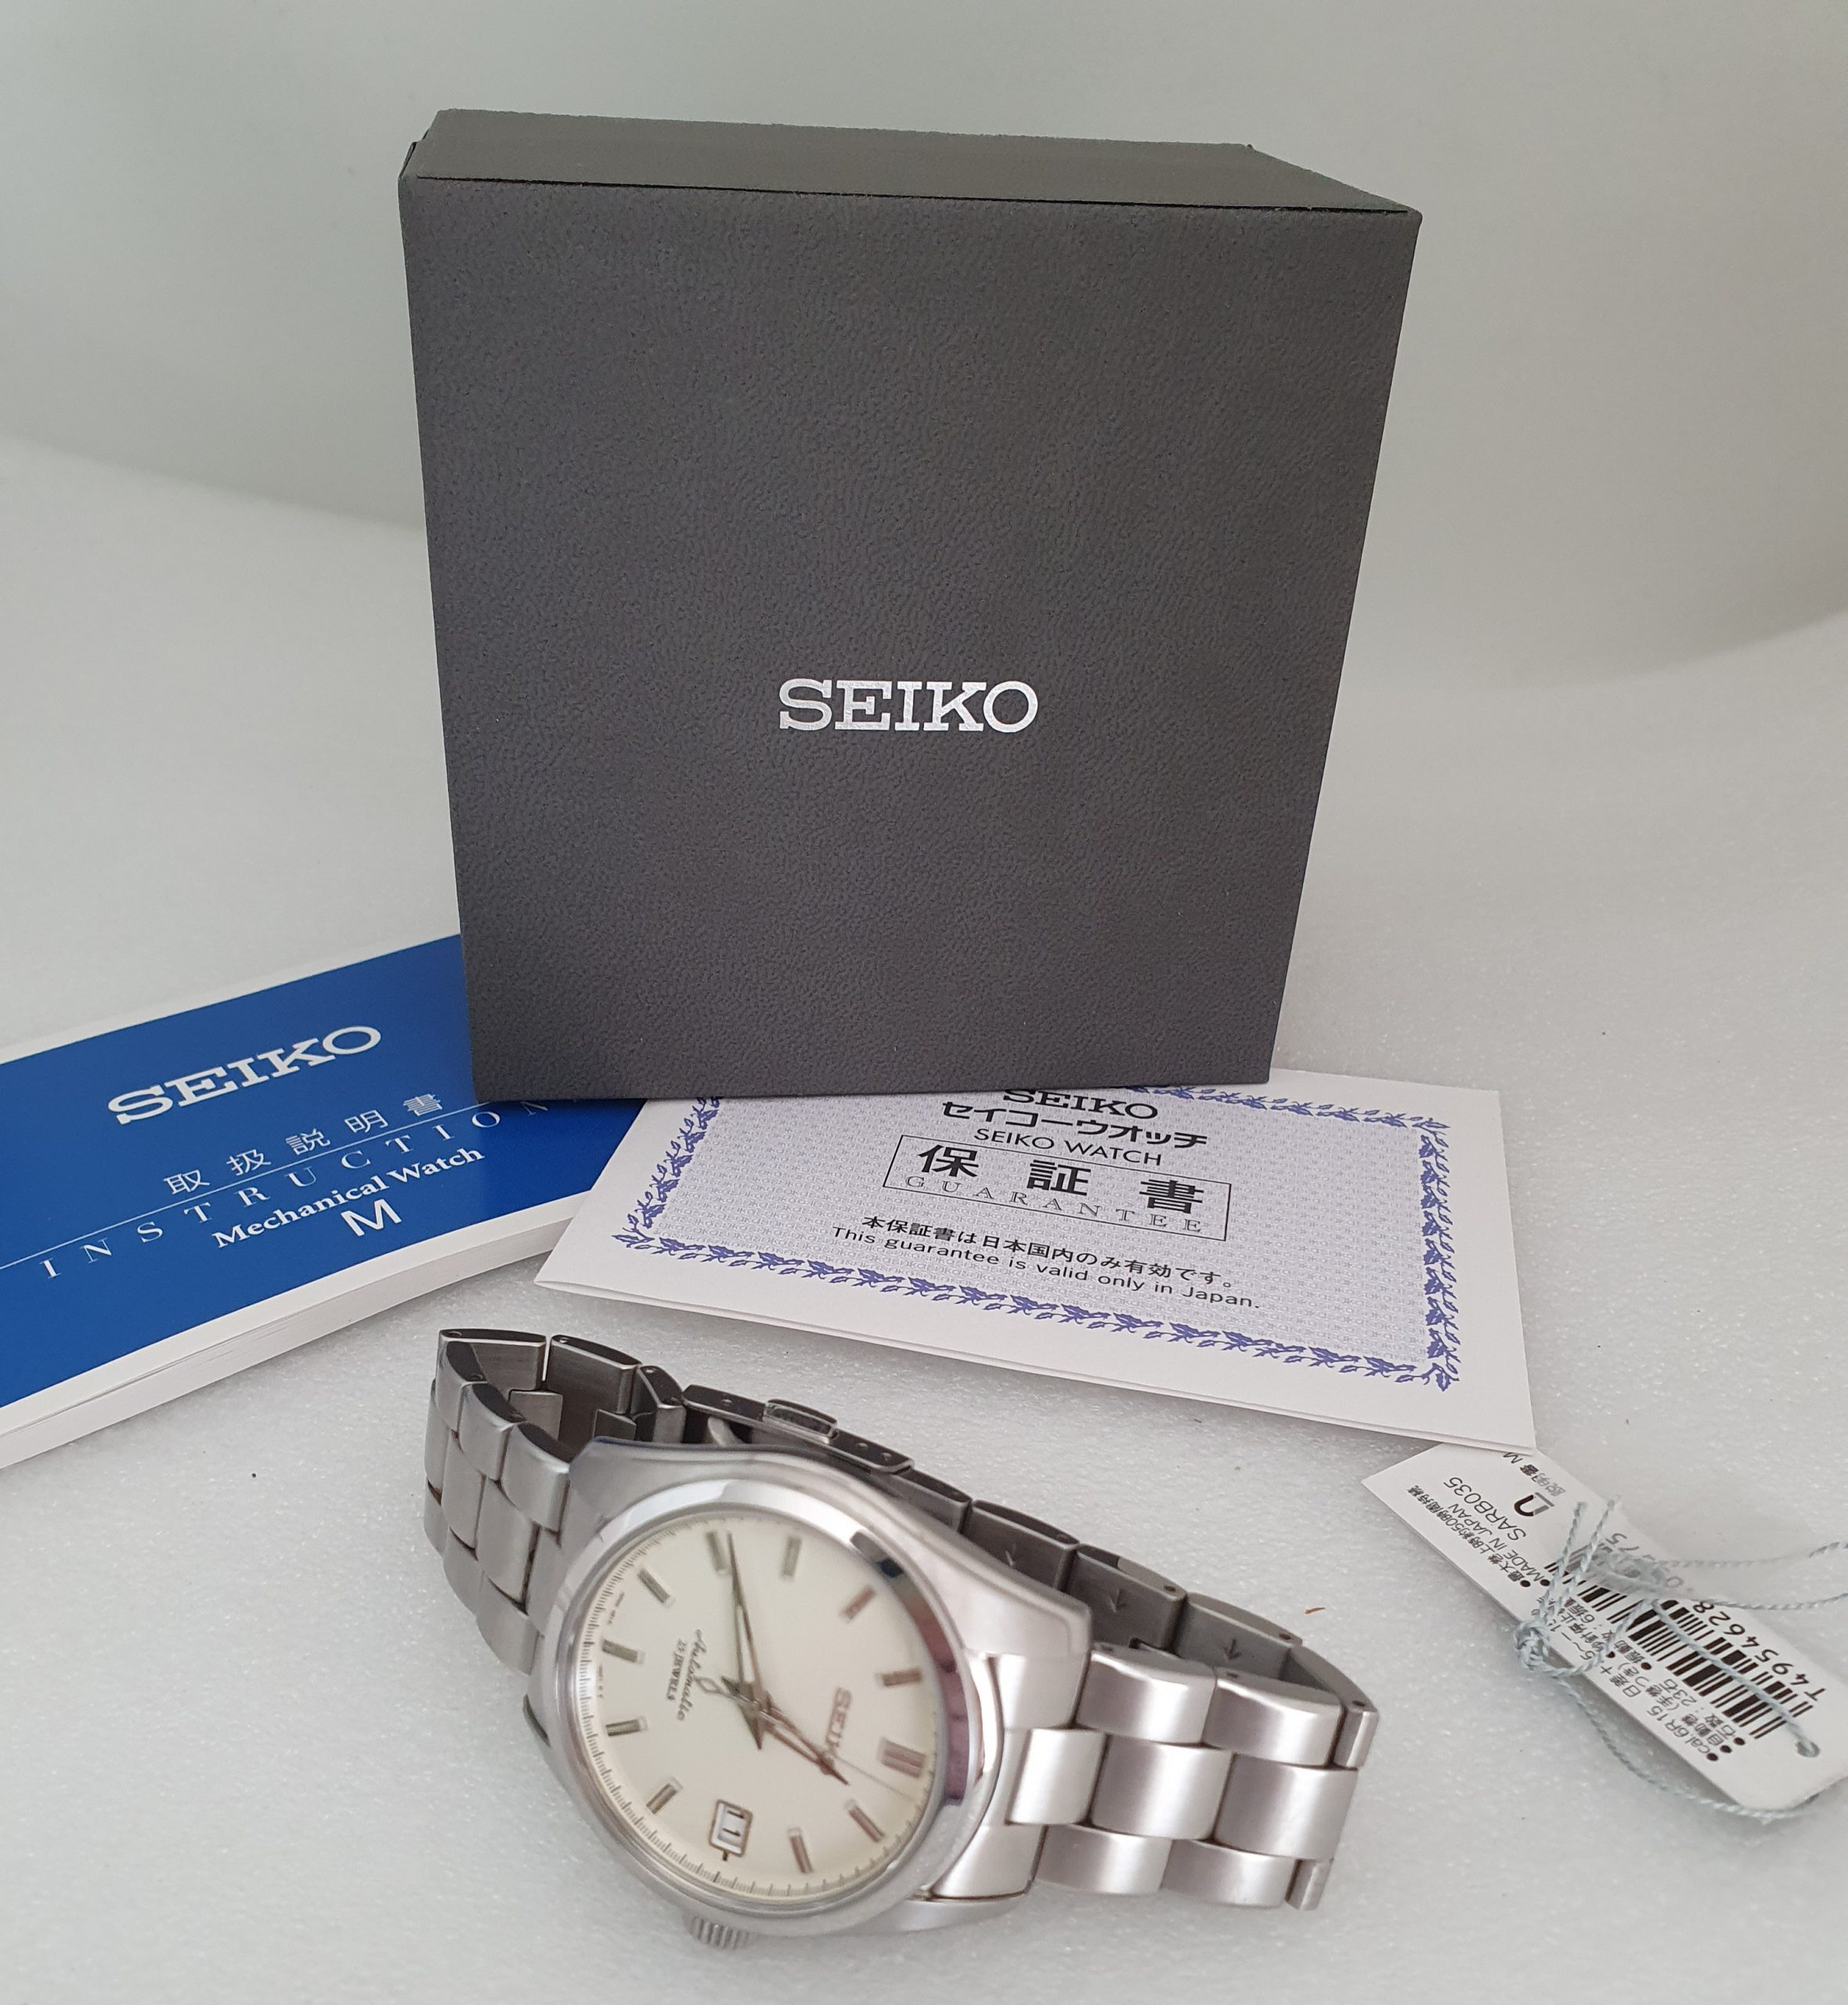 SOLD 2016 Seiko SARB 035 with box and papers - Birth Year Watches